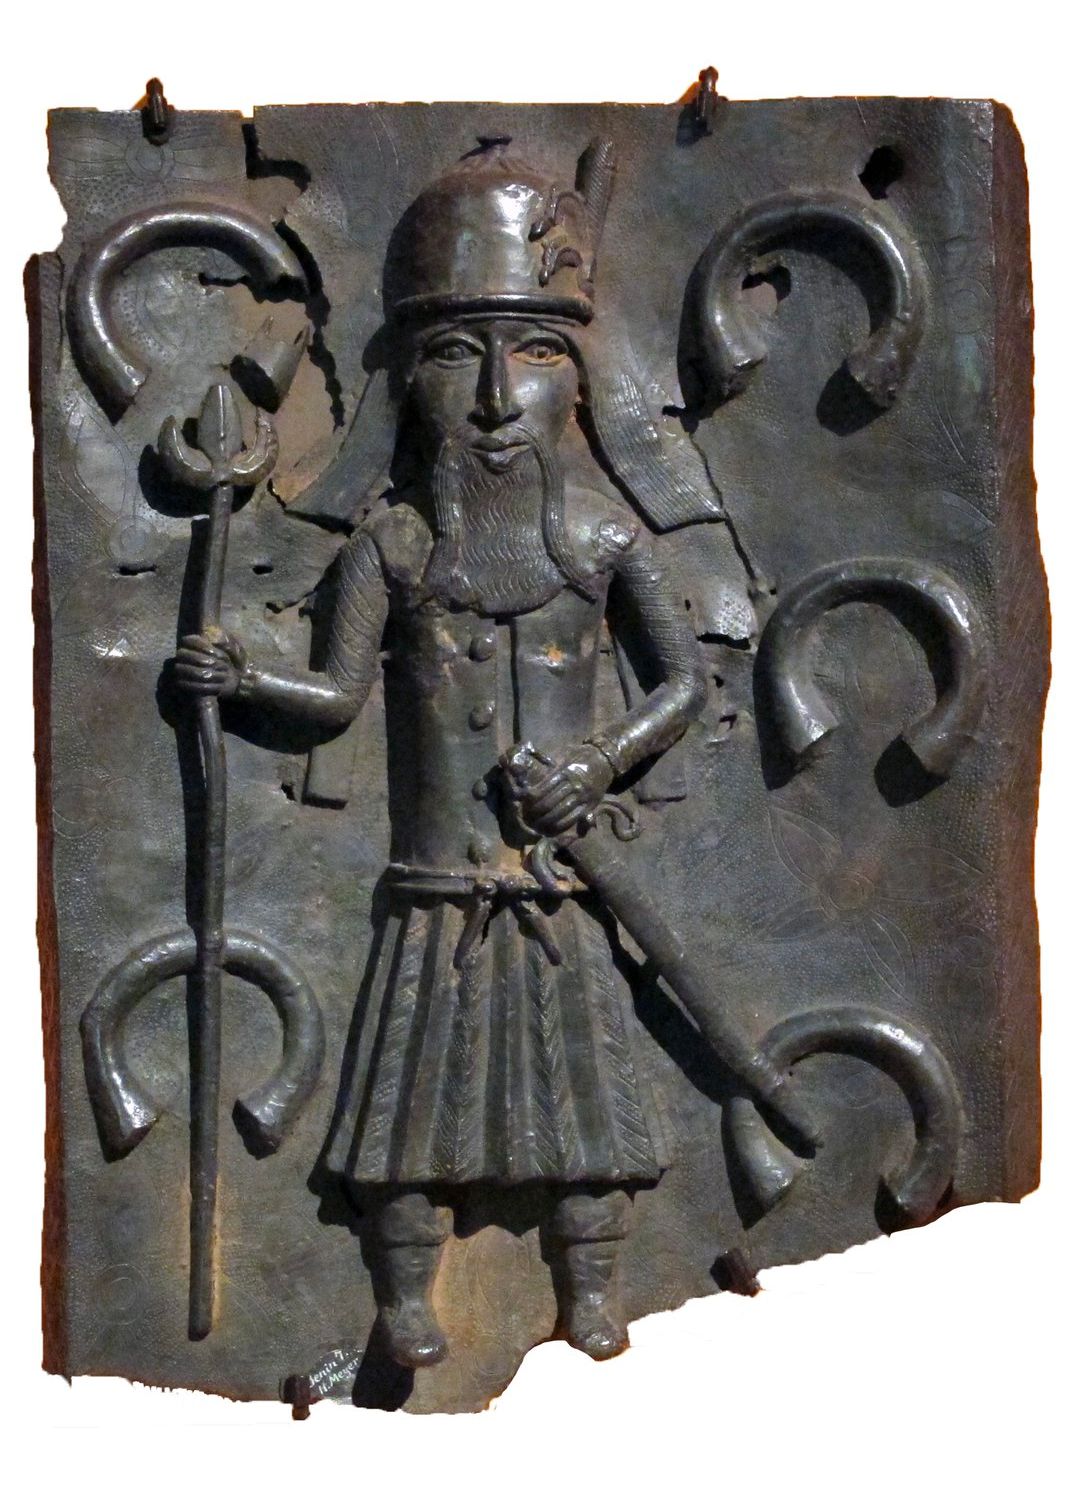 A 16th-century Benin Bronze depicting a Portuguese soldier flanked by manilla bracelets